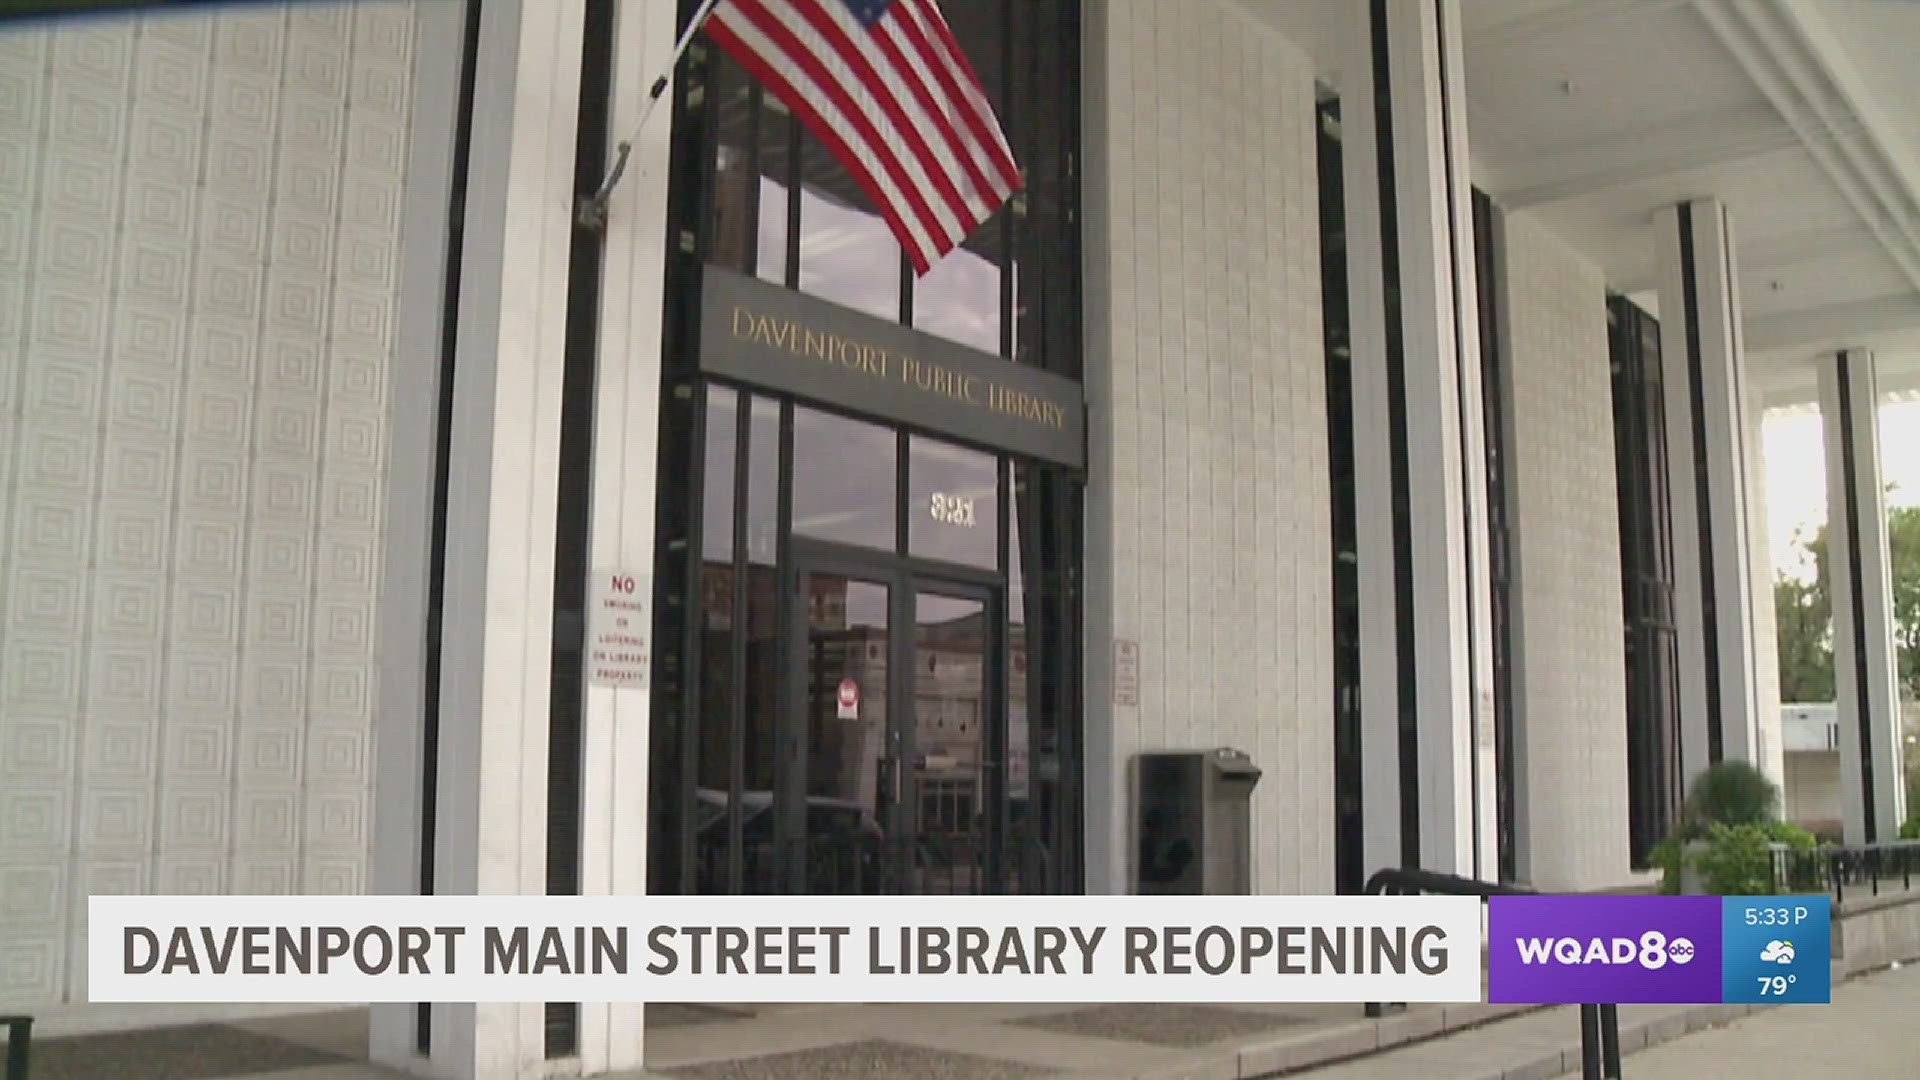 The main branch of the library has been closed since last month when the Davenport apartment collapsed.